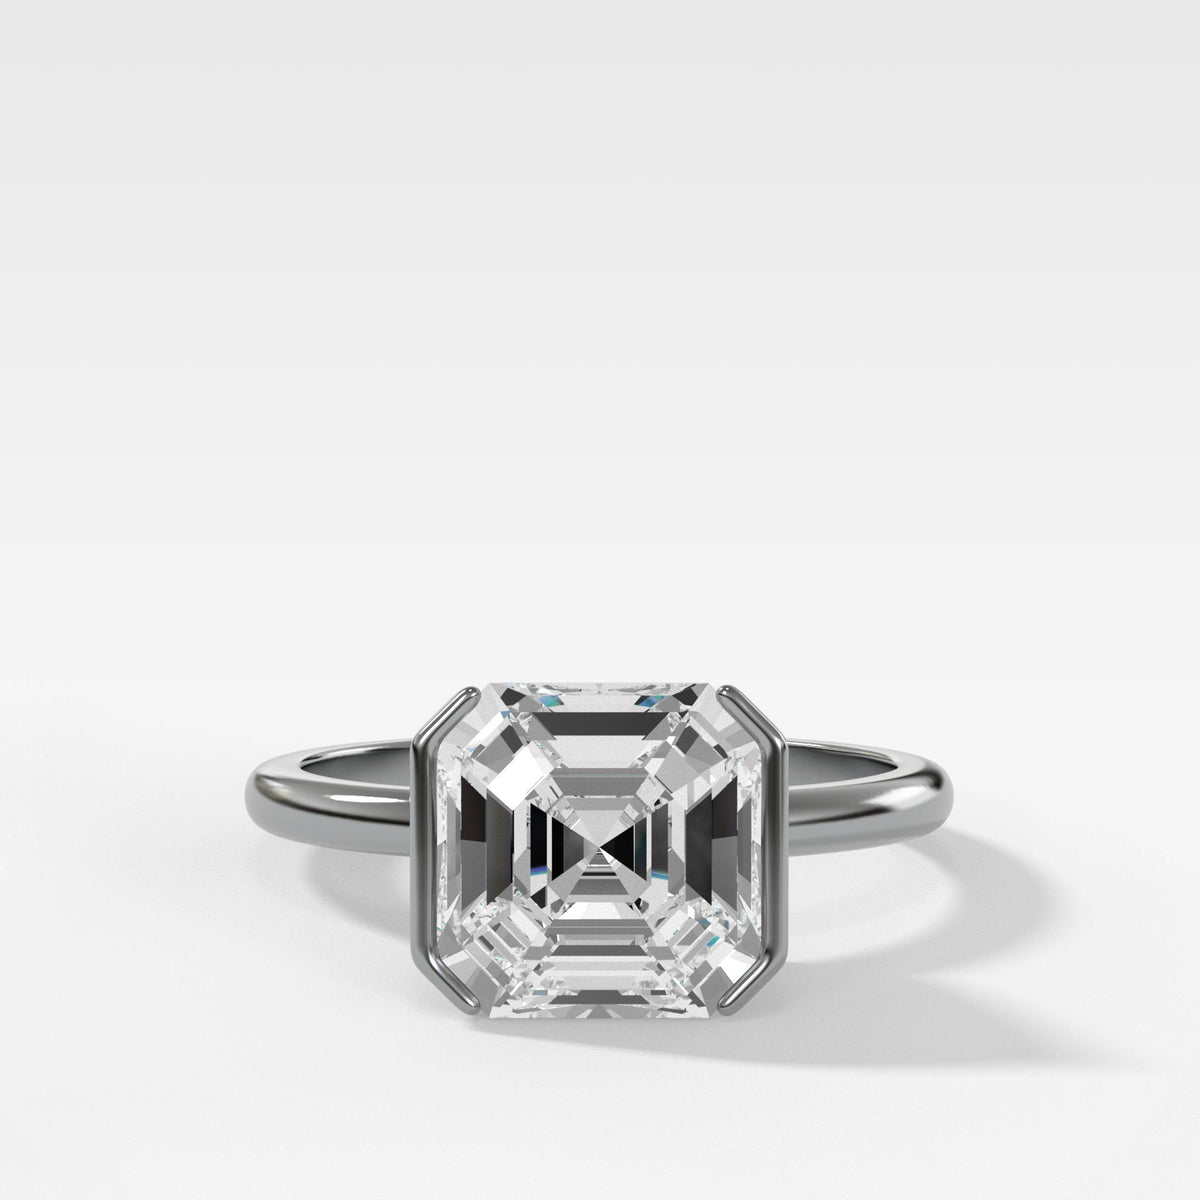 Half Bezel Solitaire Engagement Ring With Asscher Cut by Good Stone in White Gold